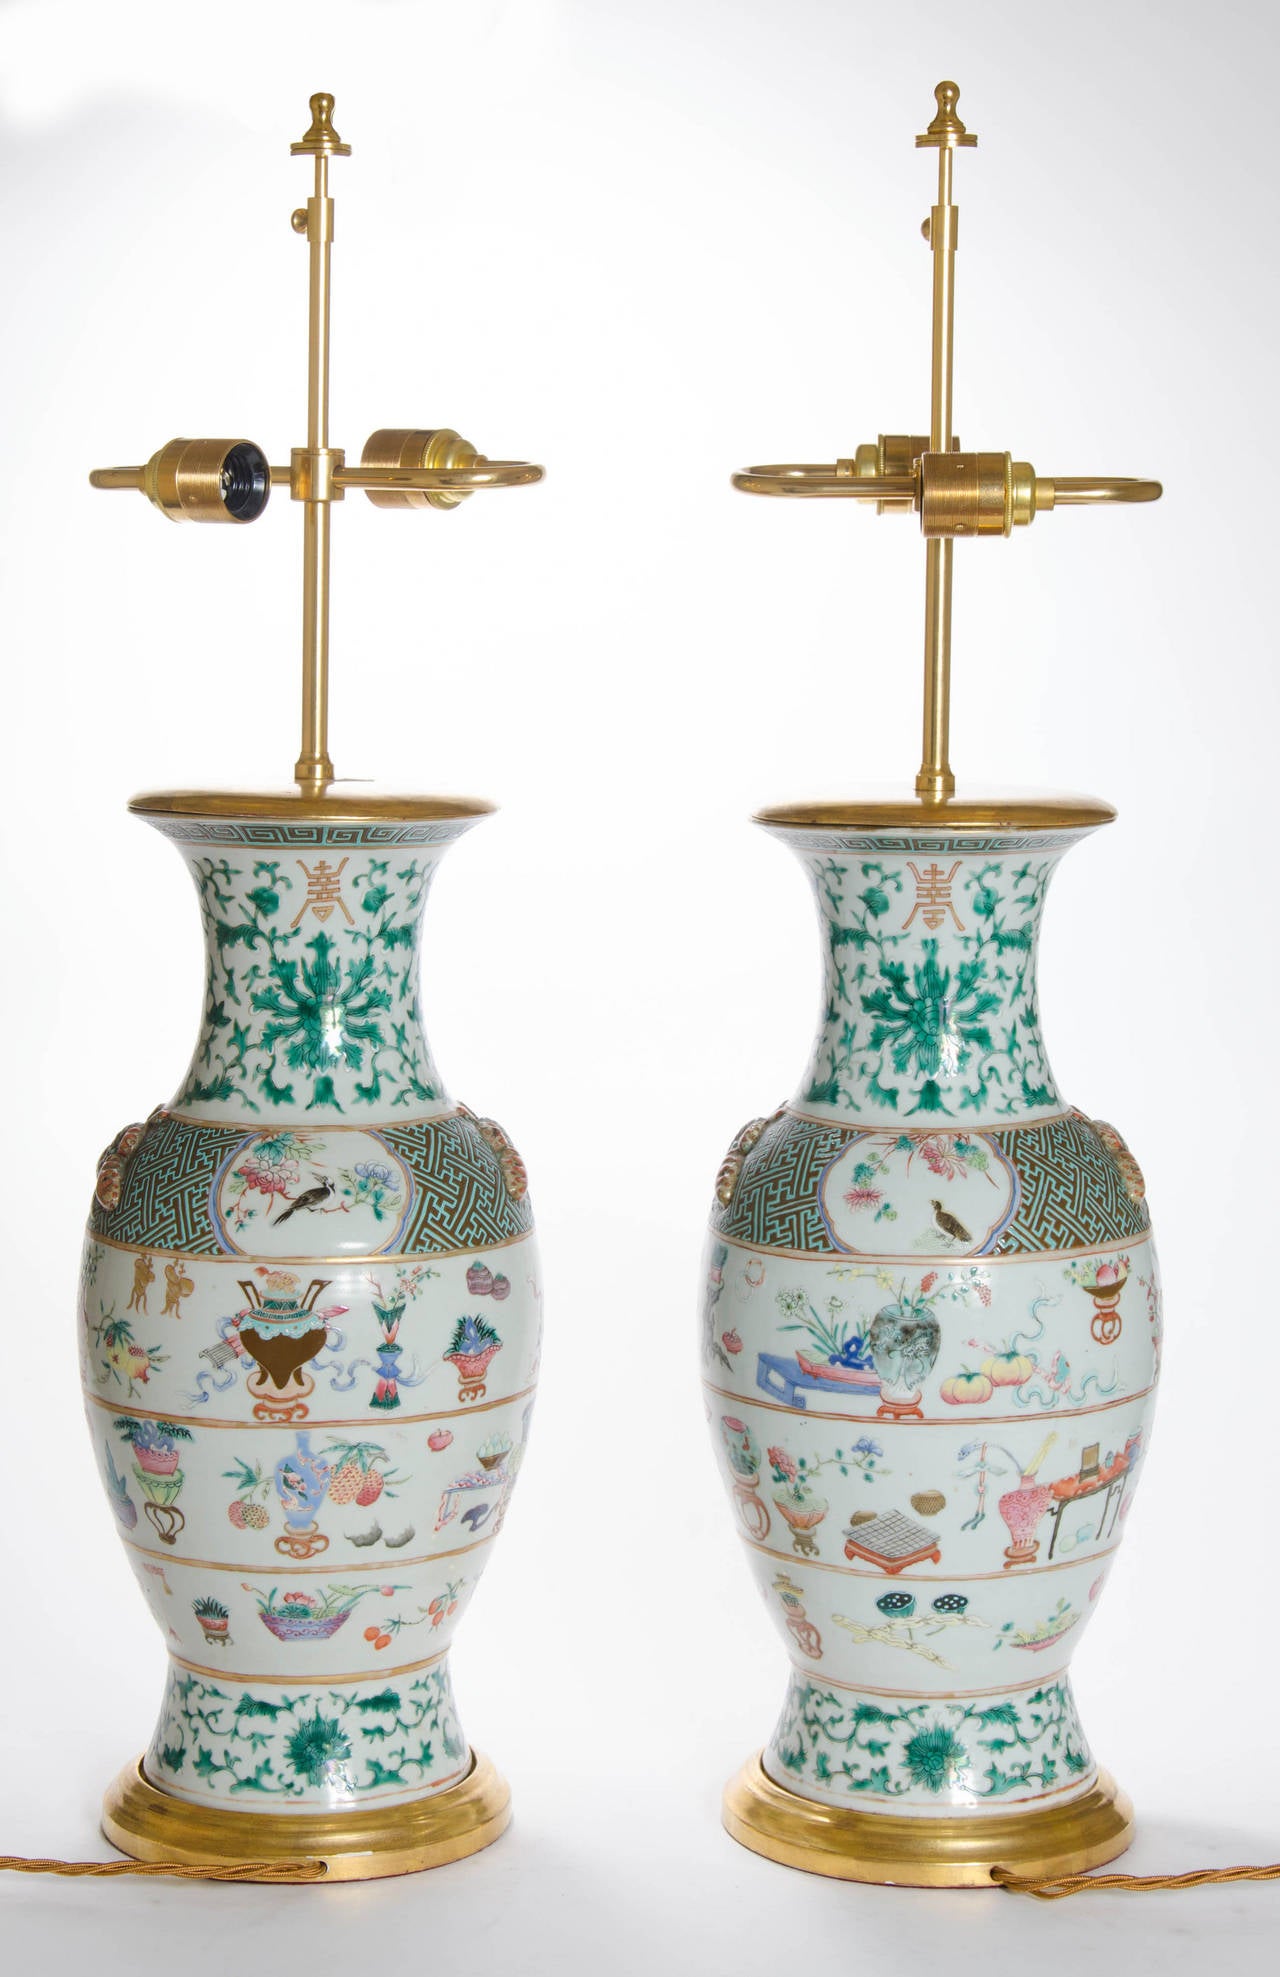 Mid-19th Century Fine Pair of Famille Rose Vases as Lamps, Chinese, circa 1840